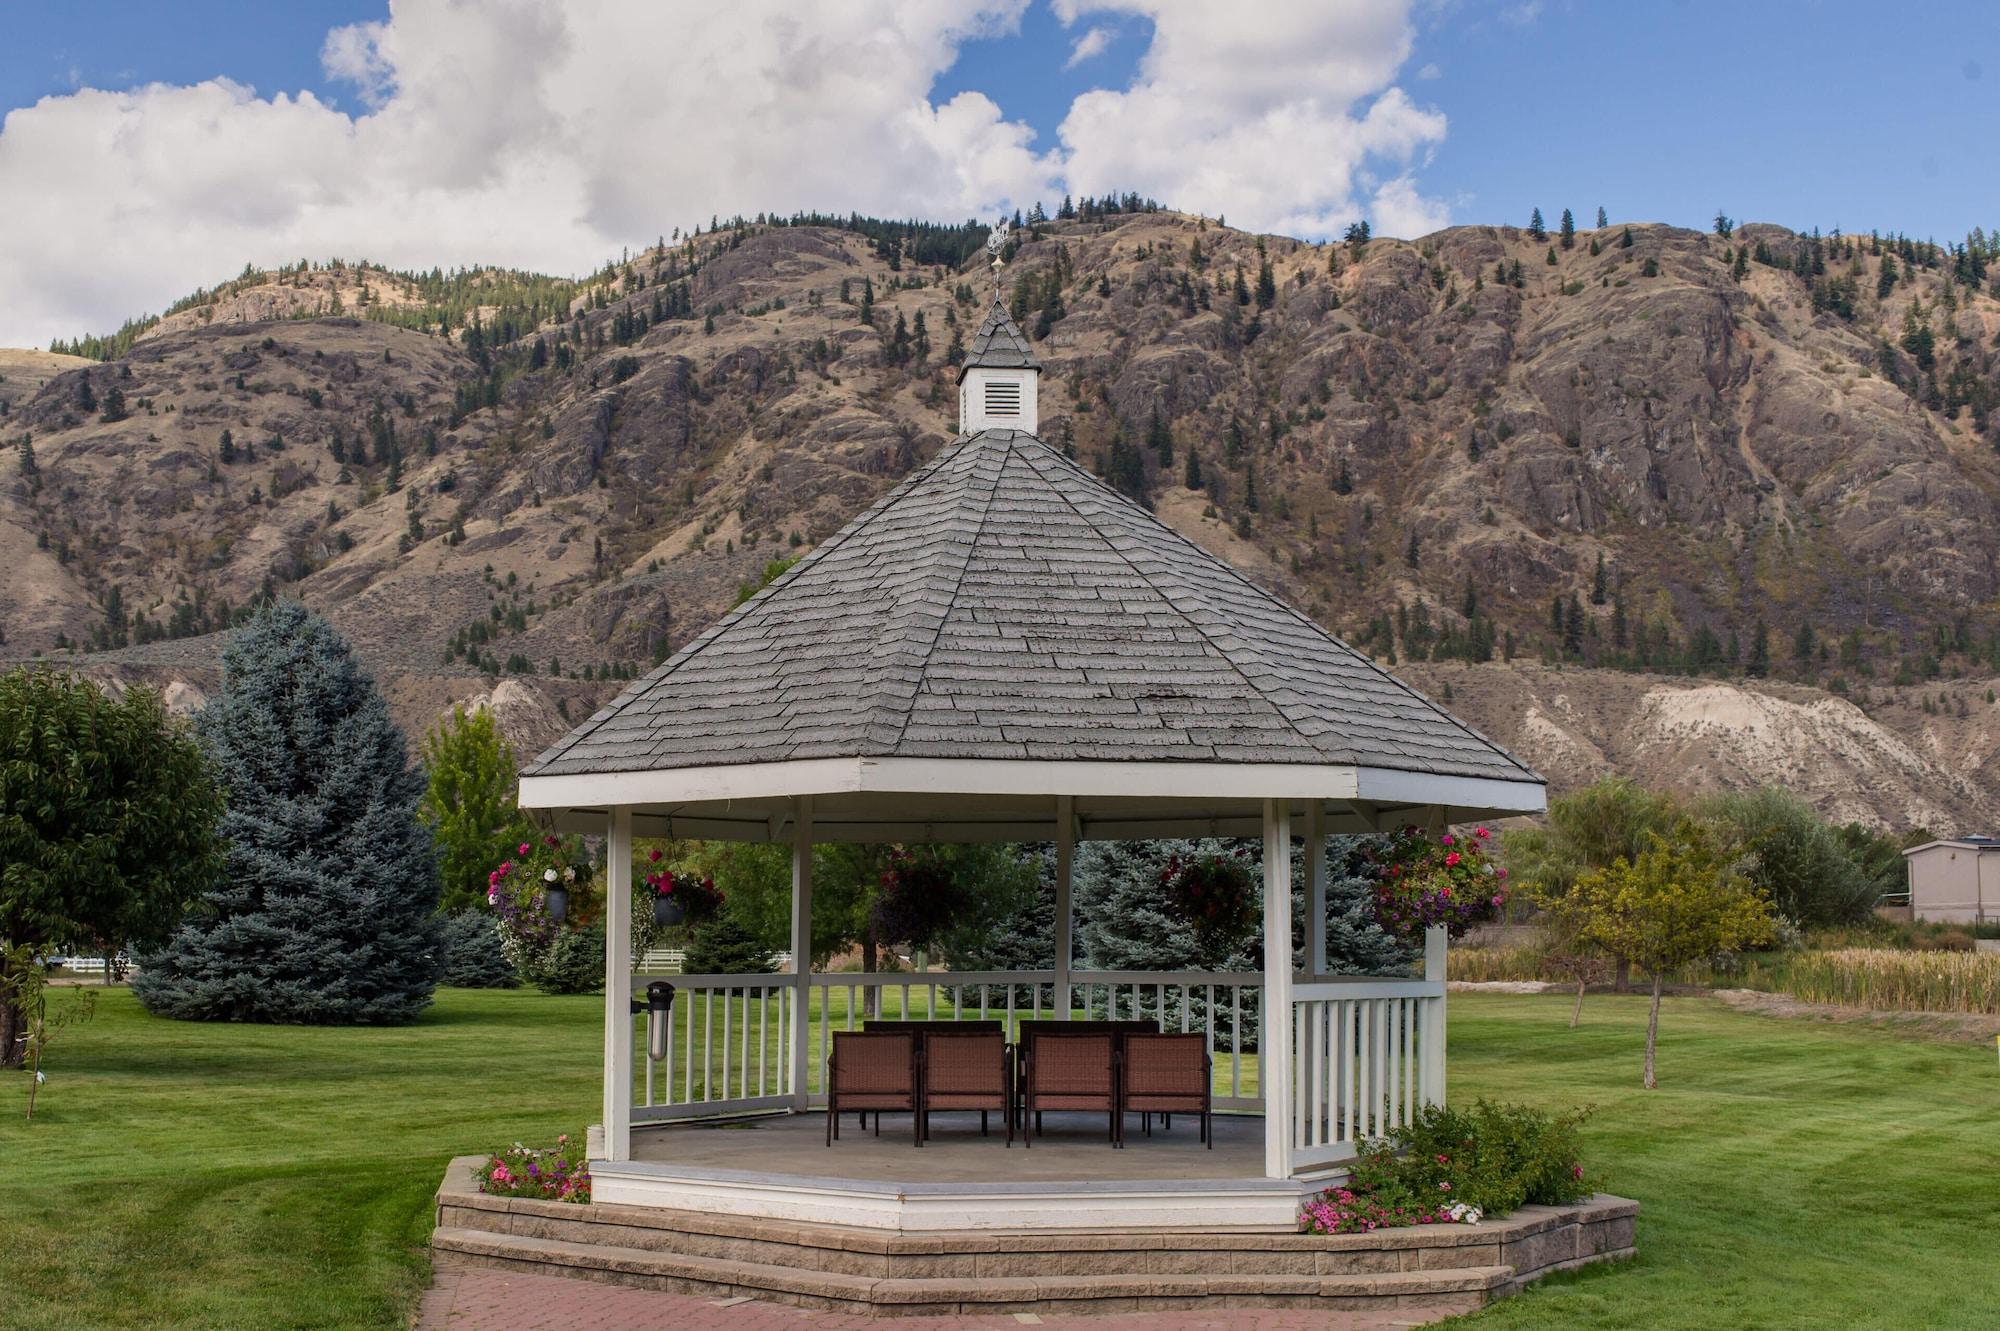 South Thompson Inn & Conference Centre Kamloops Bagian luar foto